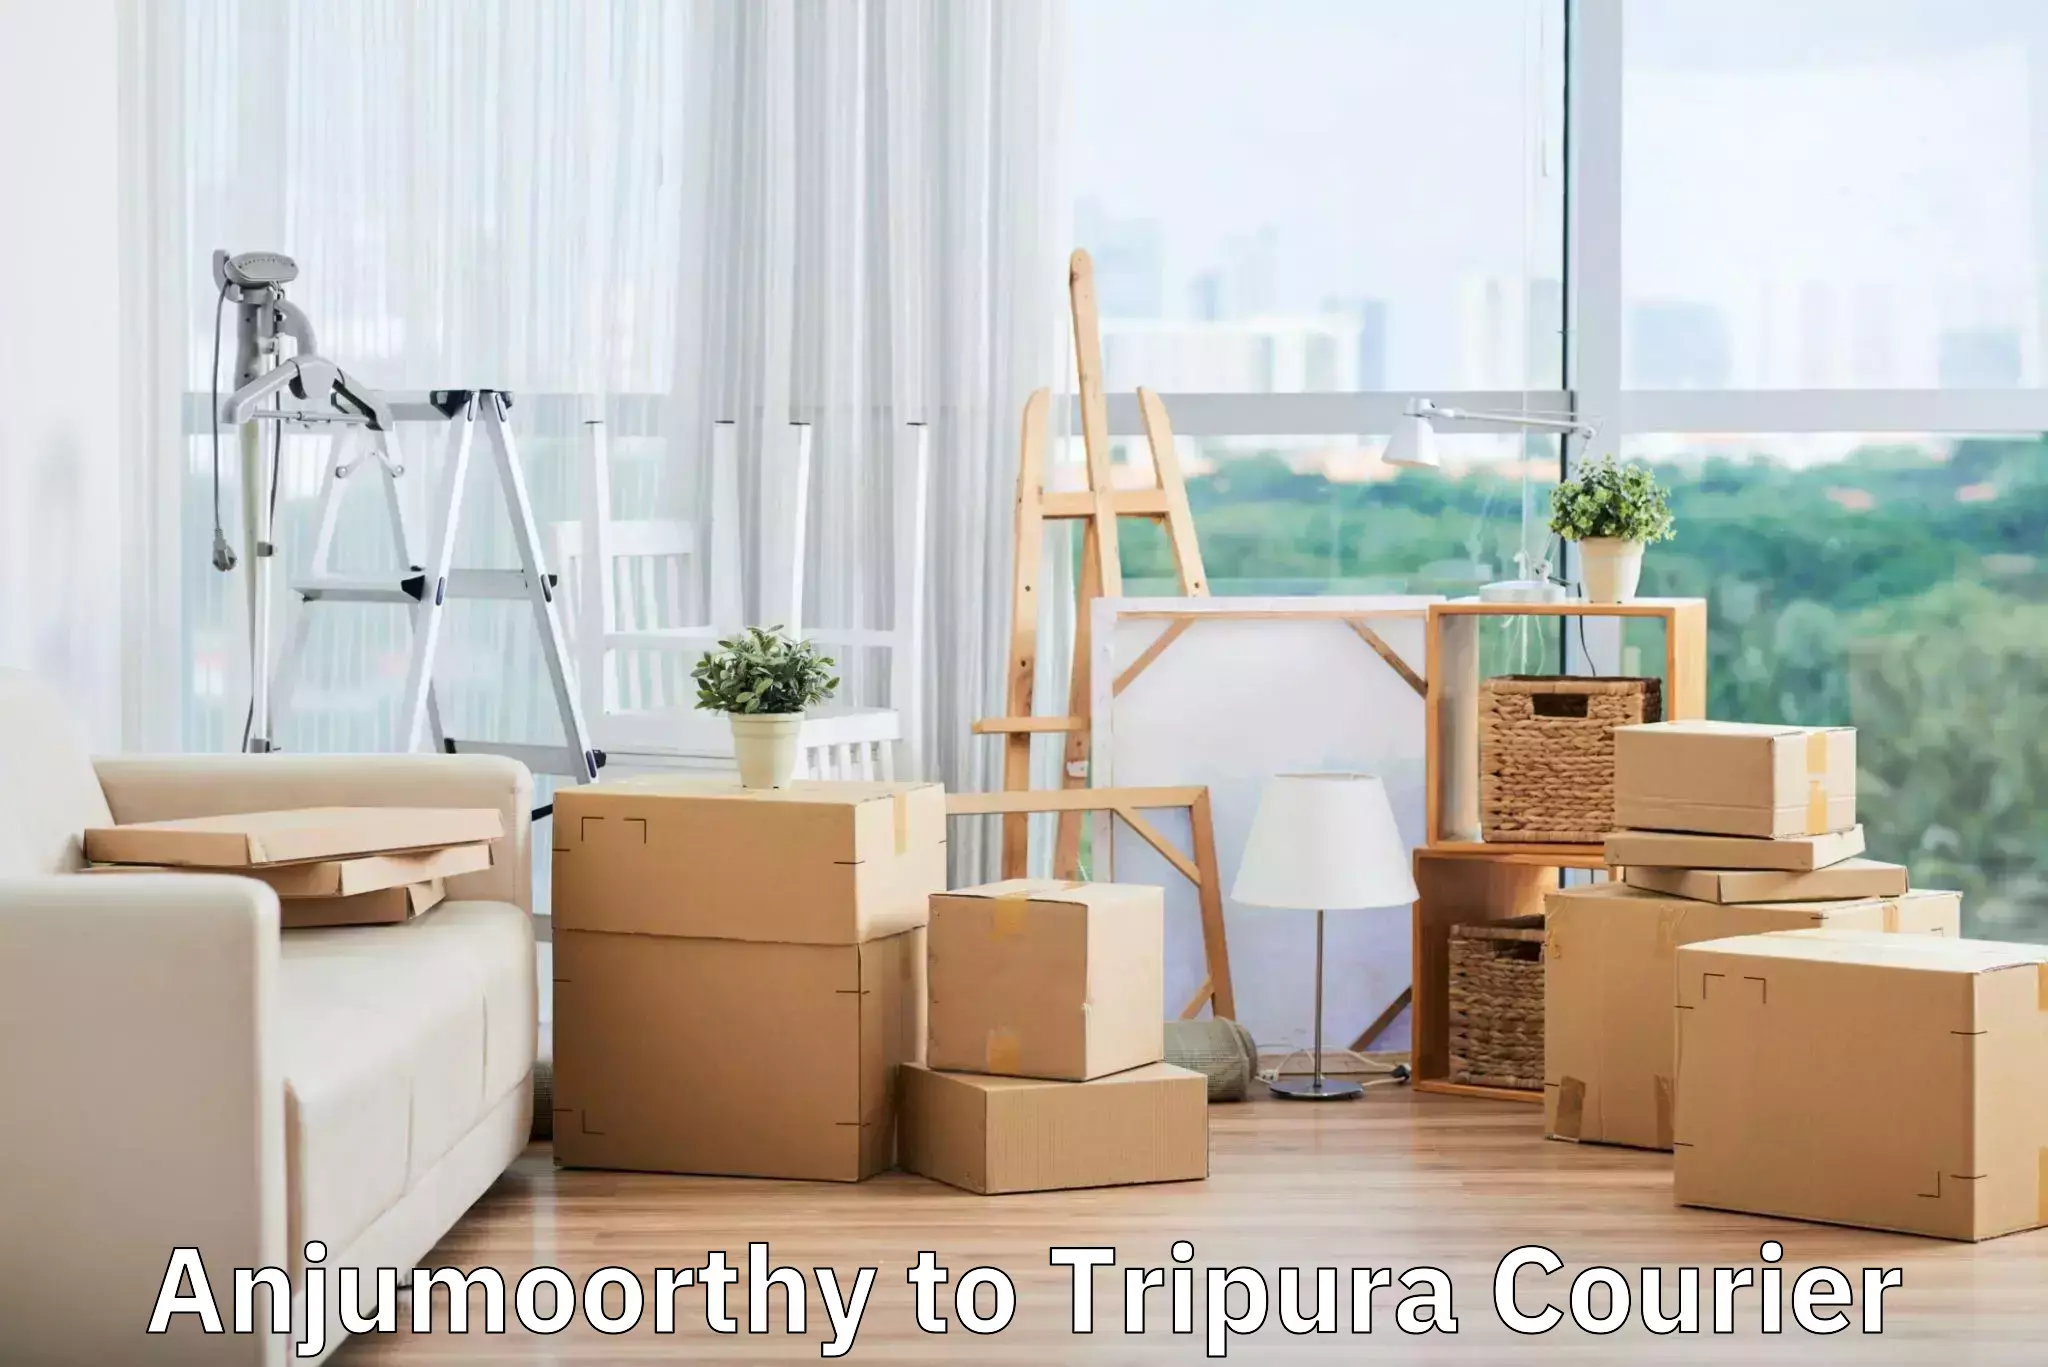 Luggage courier excellence Anjumoorthy to Udaipur Tripura